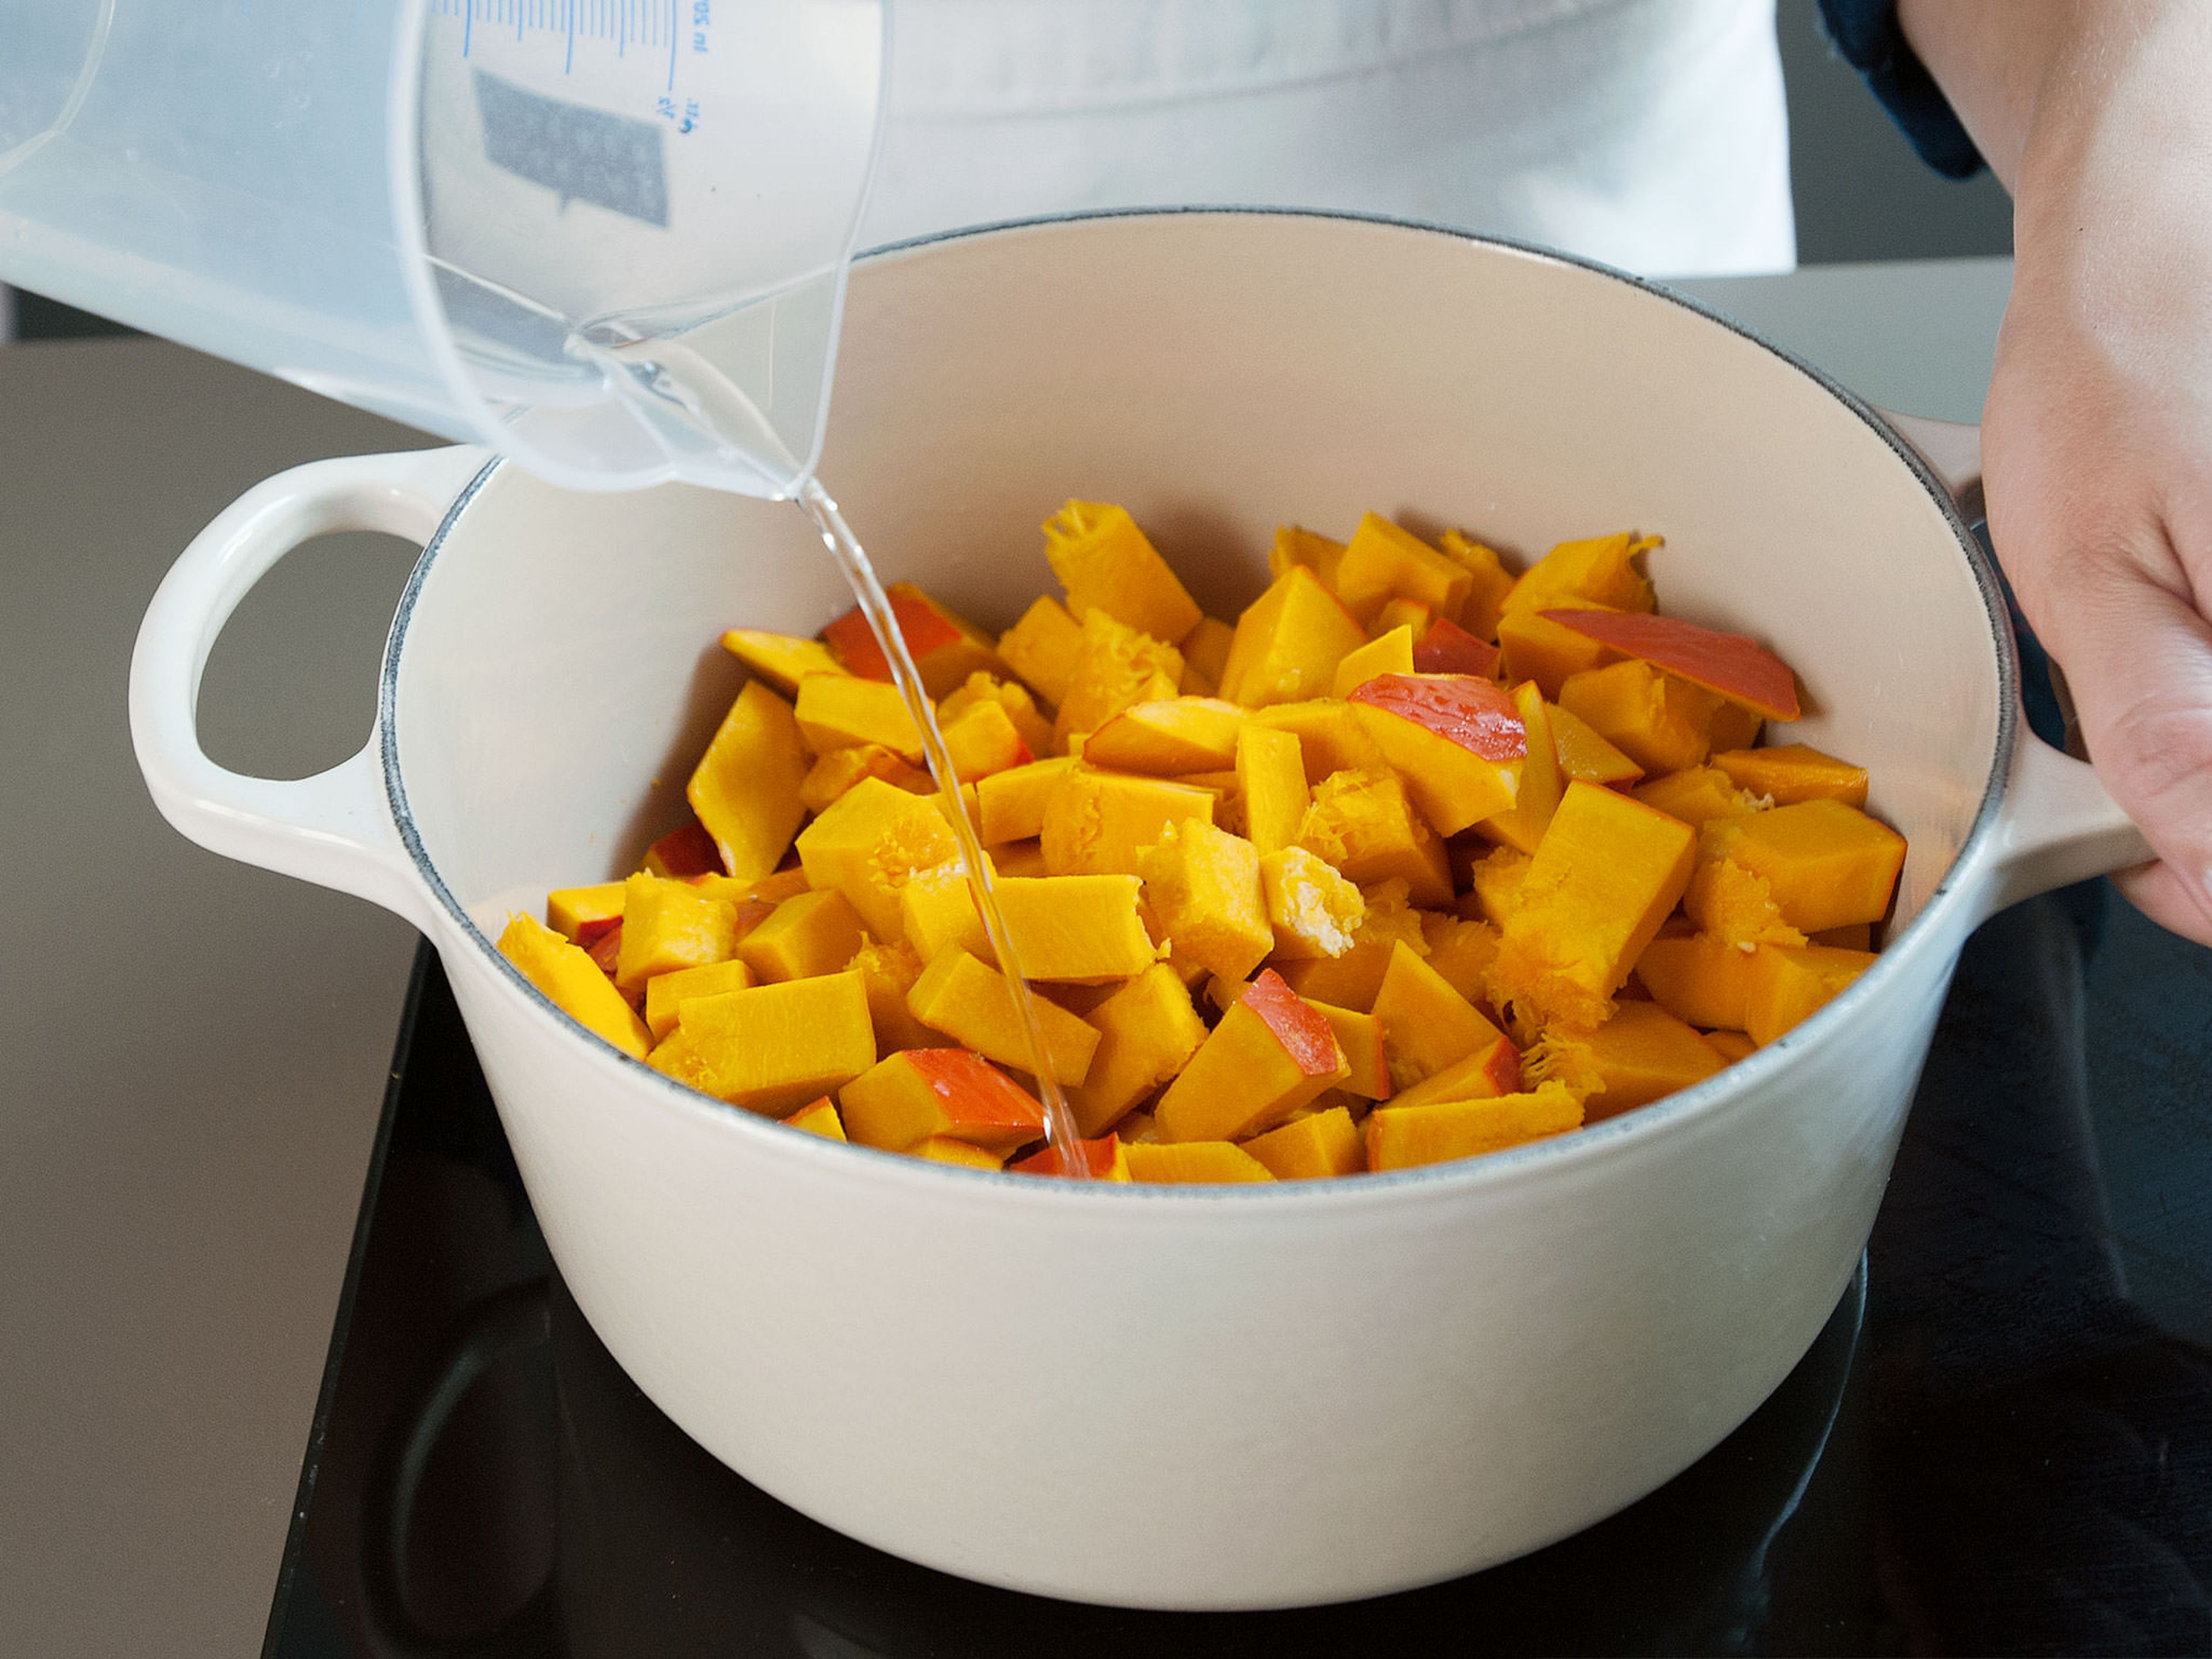 To prepare pumpkin purée, deseed and cut Hokkaido pumpkin into pieces. Place in a Dutch oven along with some water. Steam over medium heat with lid slightly cracked until soft, approx. 25 min.